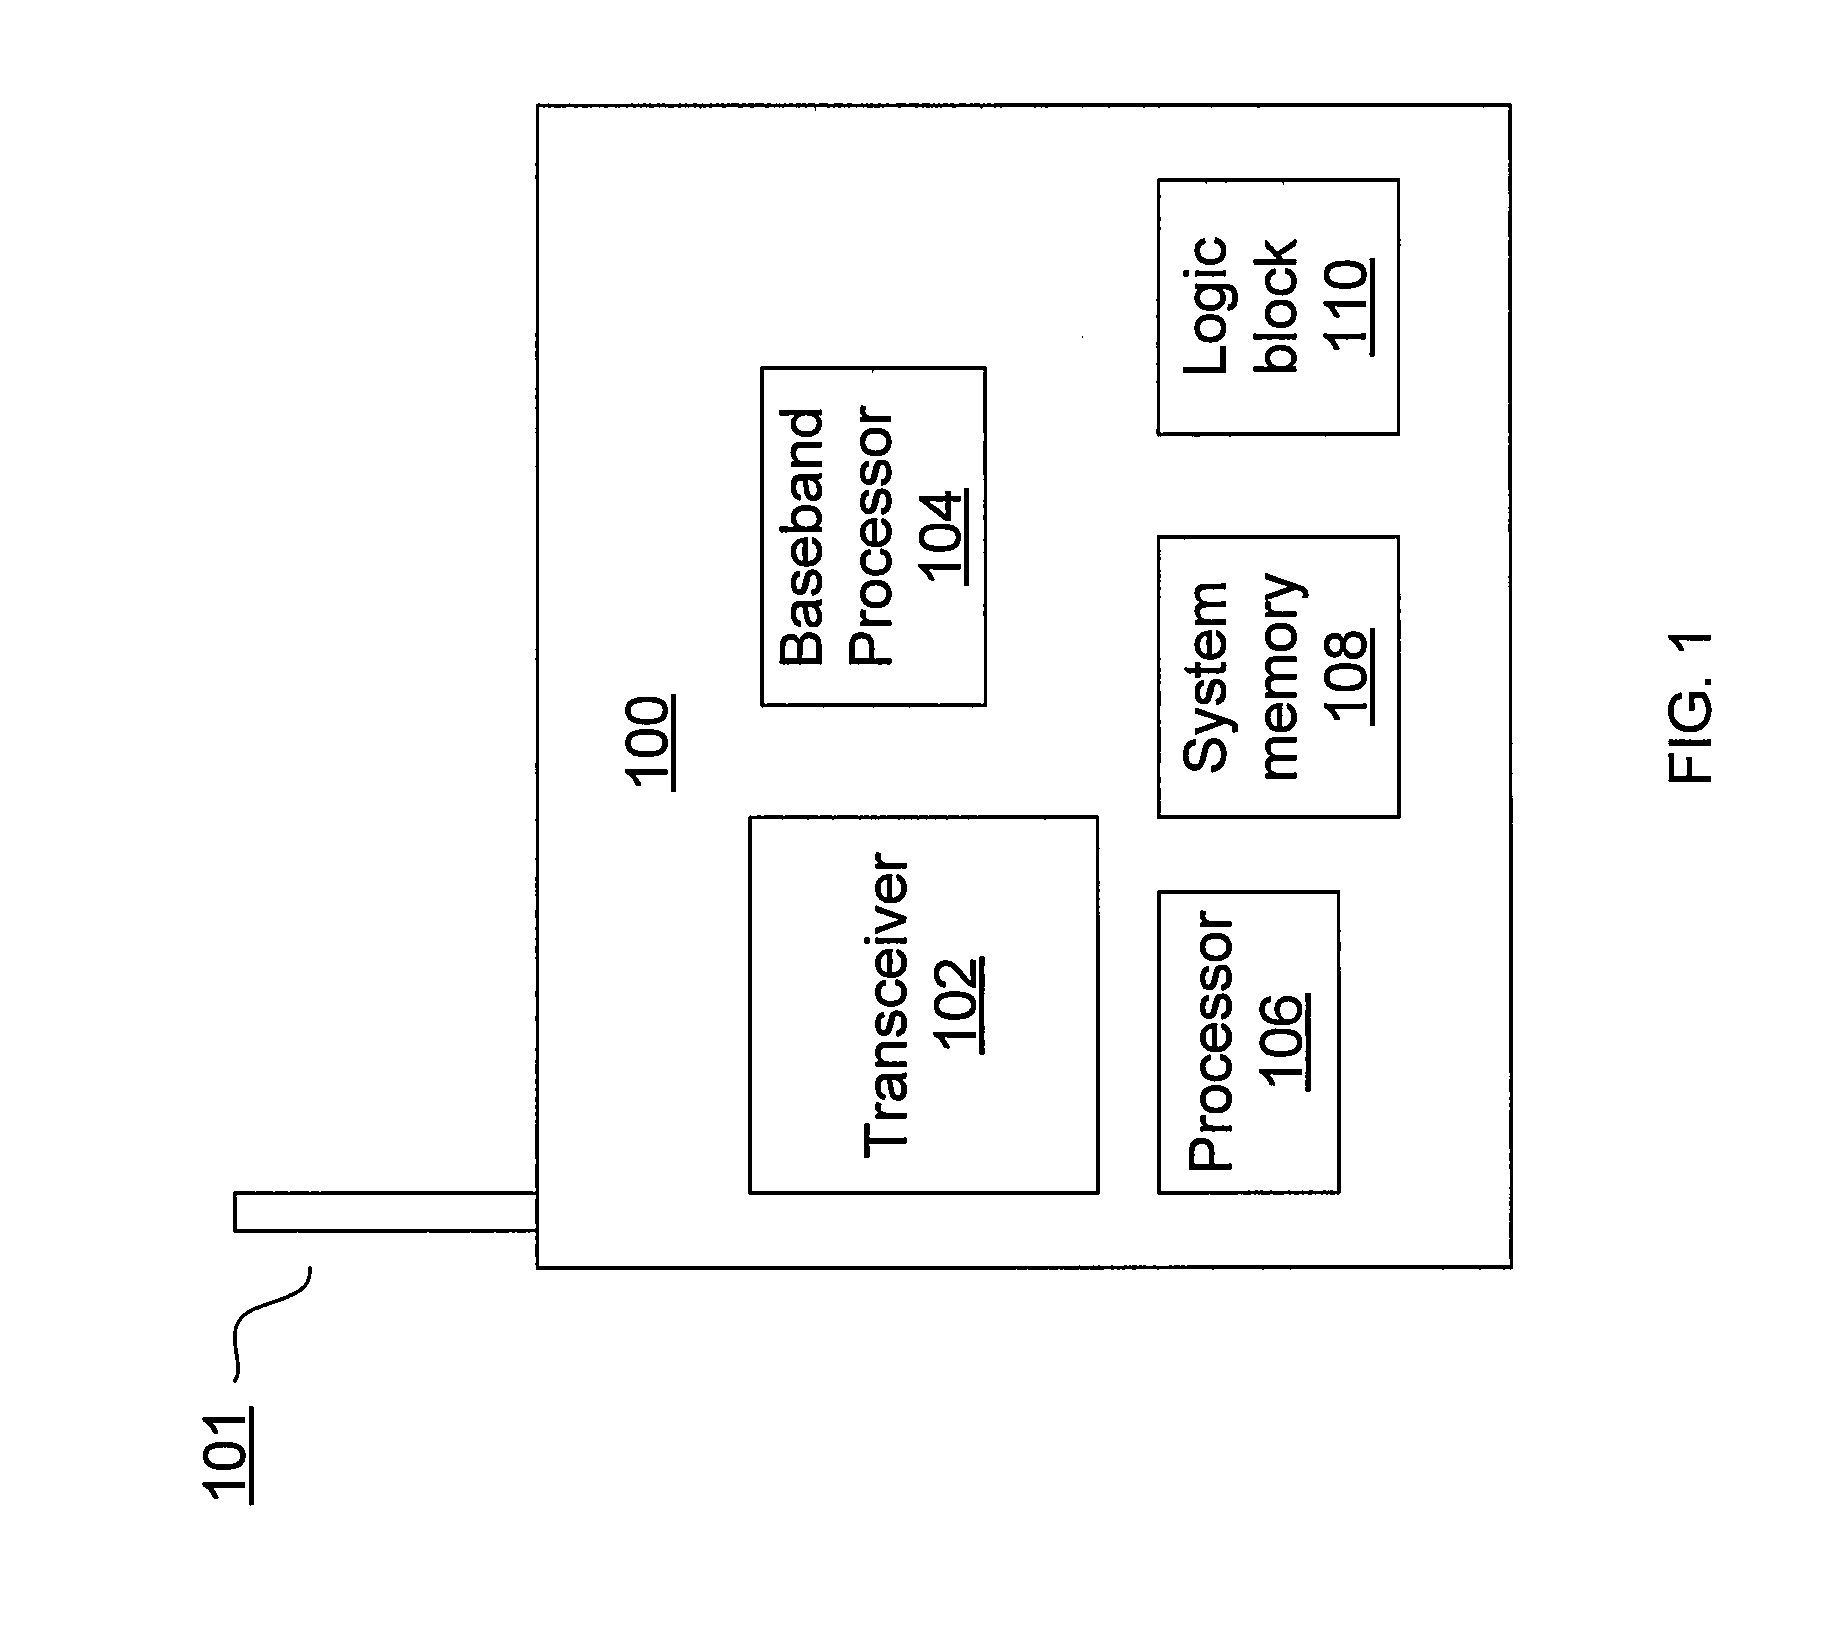 Method and system for optimal frequency planning for an integrated communication system with multiple receivers